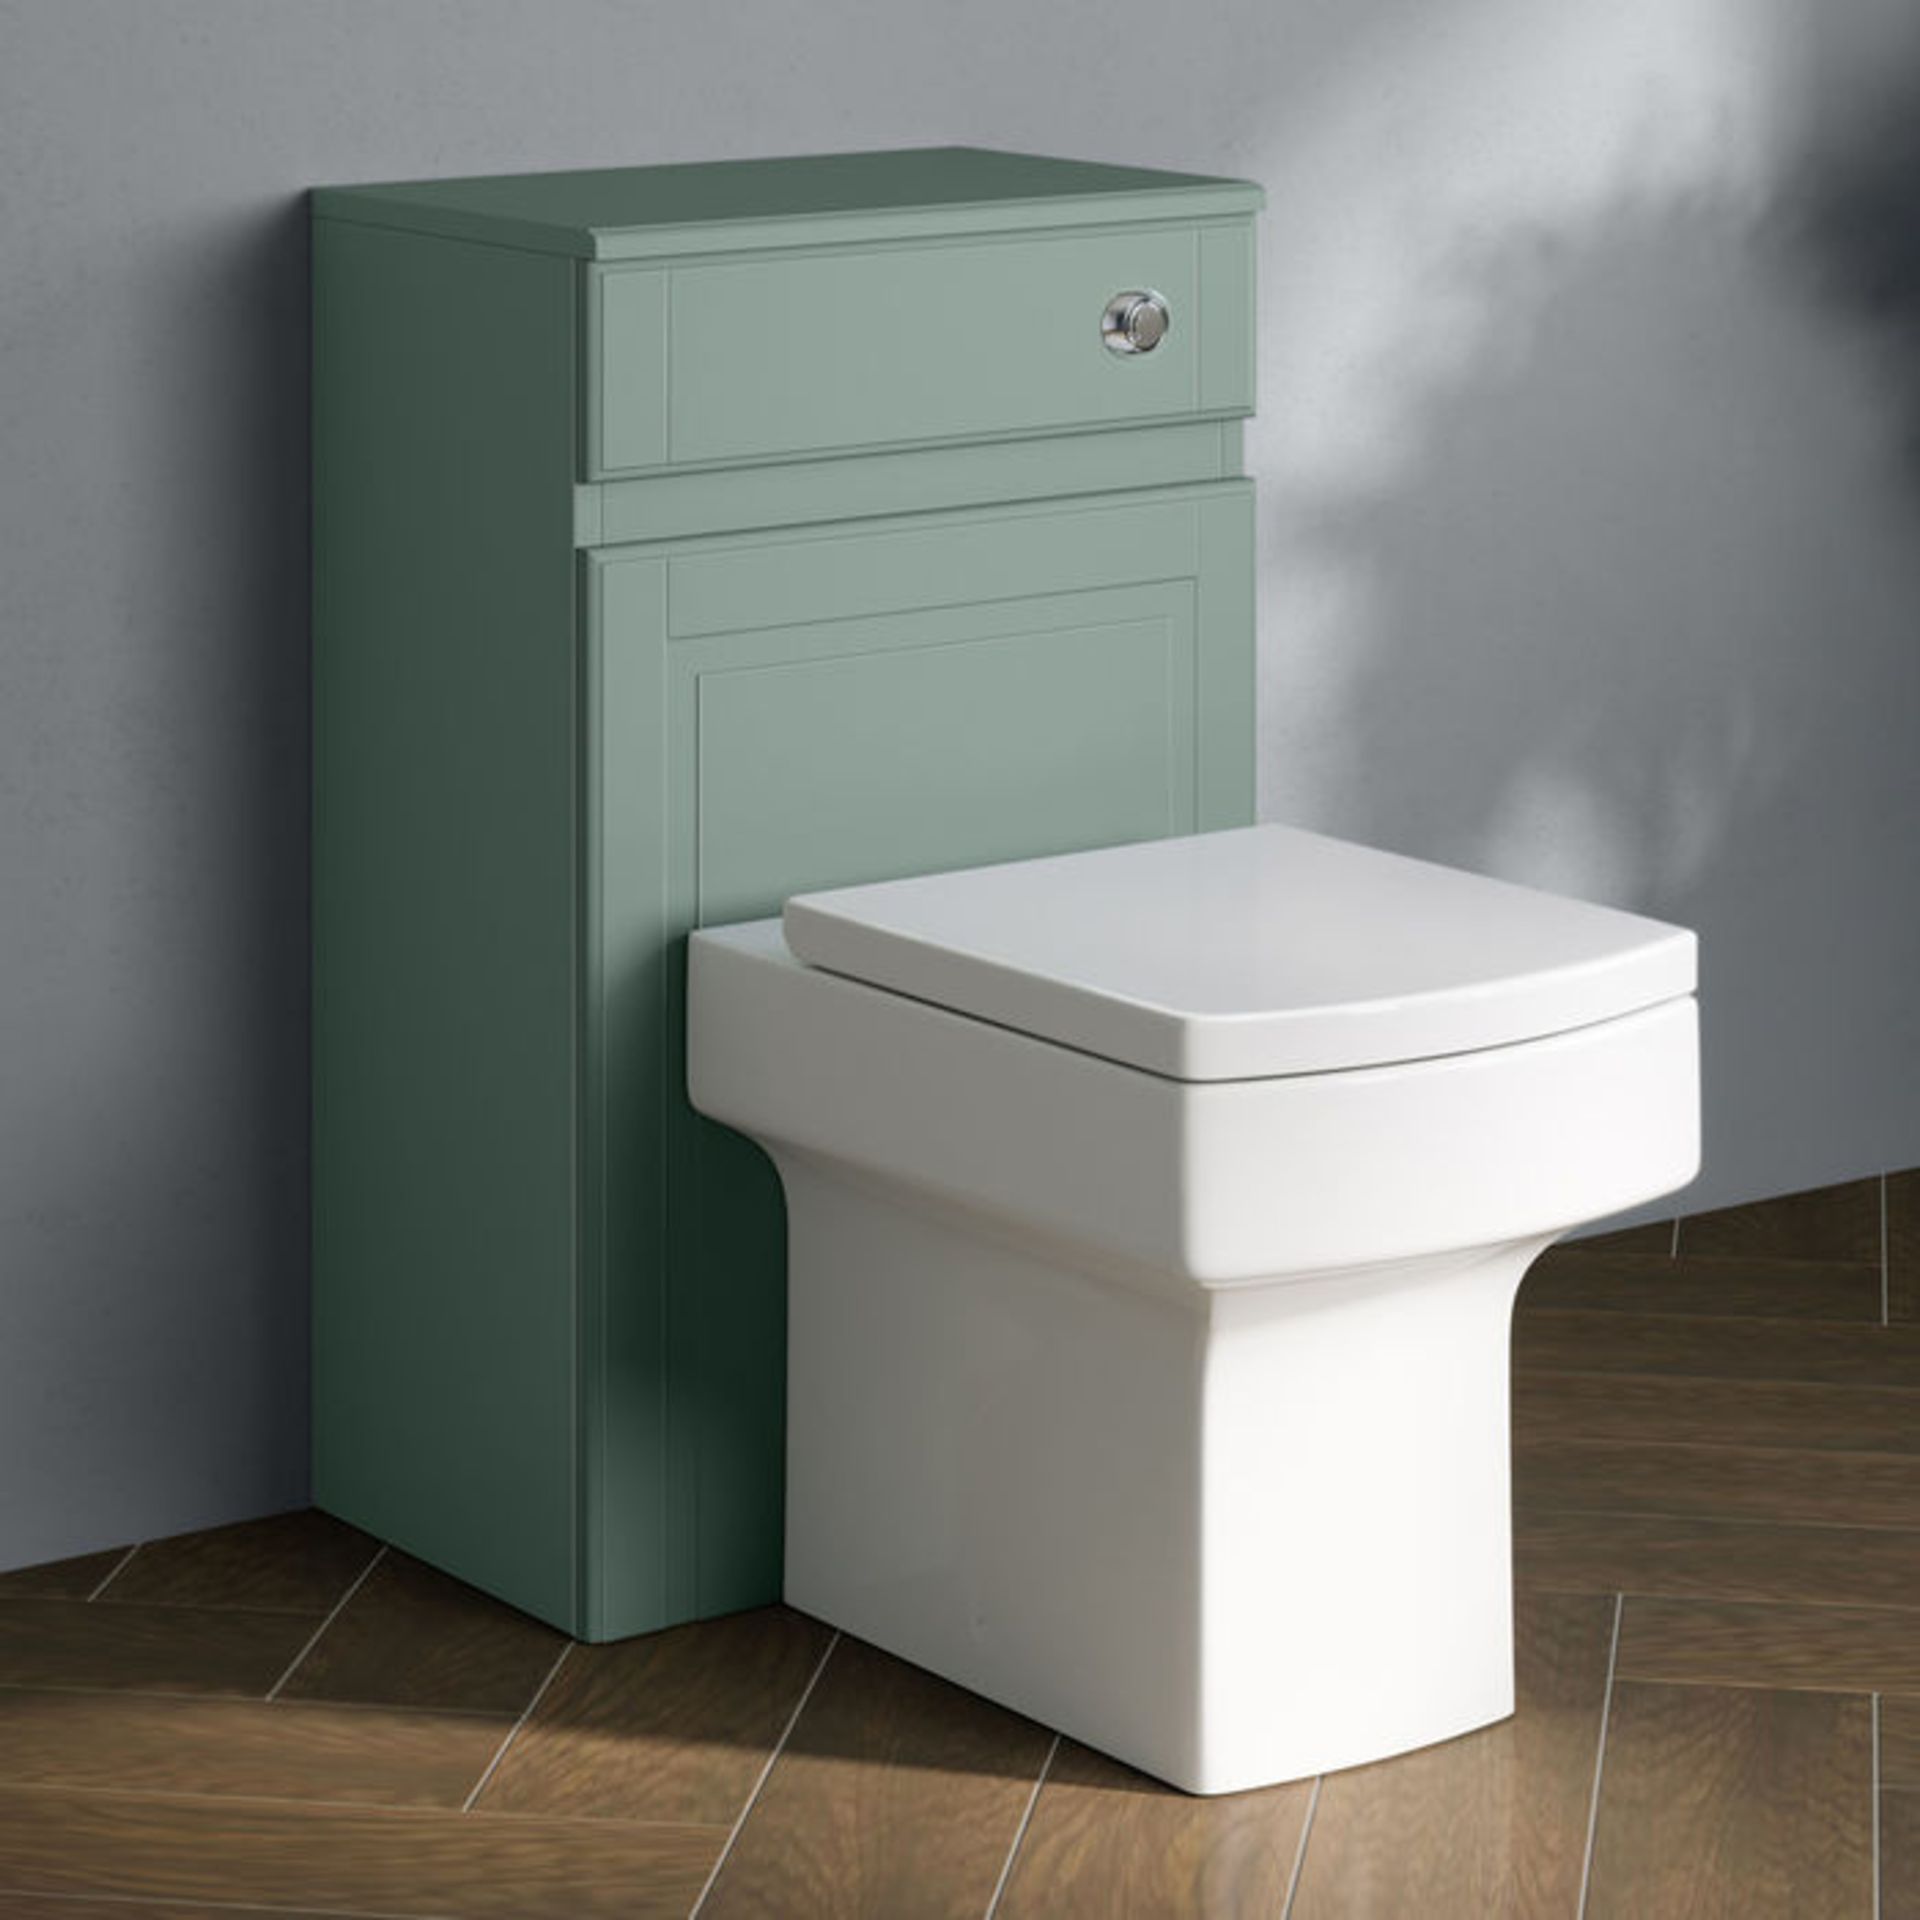 (YC48) Cambridge Back To Wall Toilet Unit - Marine Mist. RRP £120.99. Our discreet unit cleverly